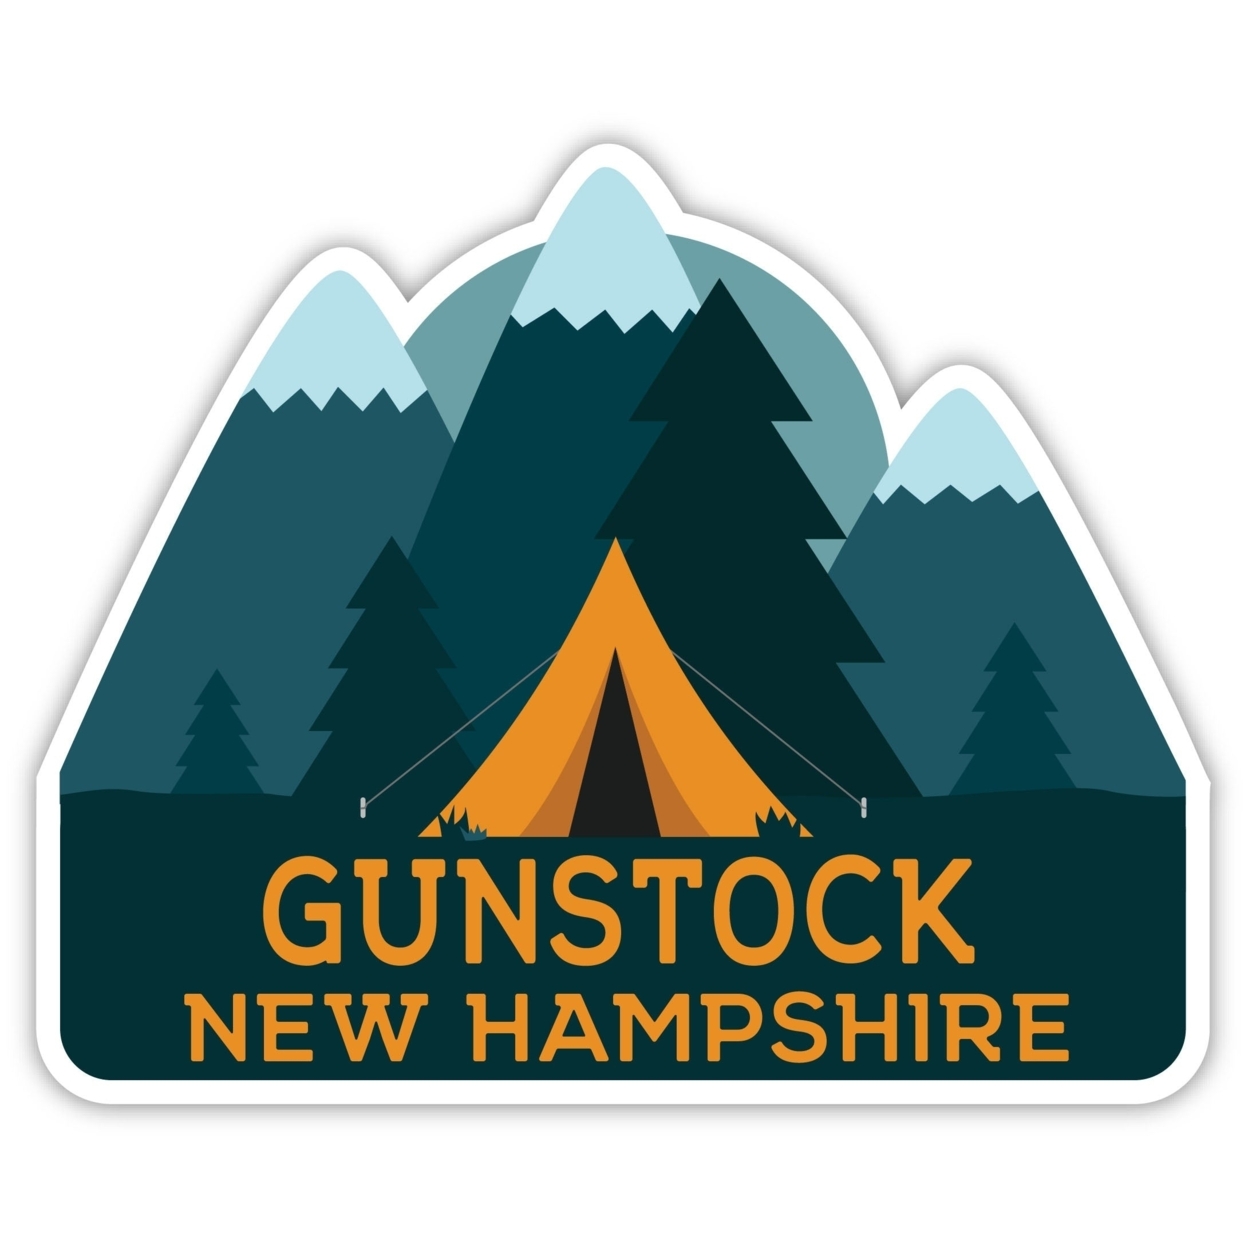 Gunstock New Hampshire Souvenir Decorative Stickers (Choose Theme And Size) - 4-Pack, 4-Inch, Tent